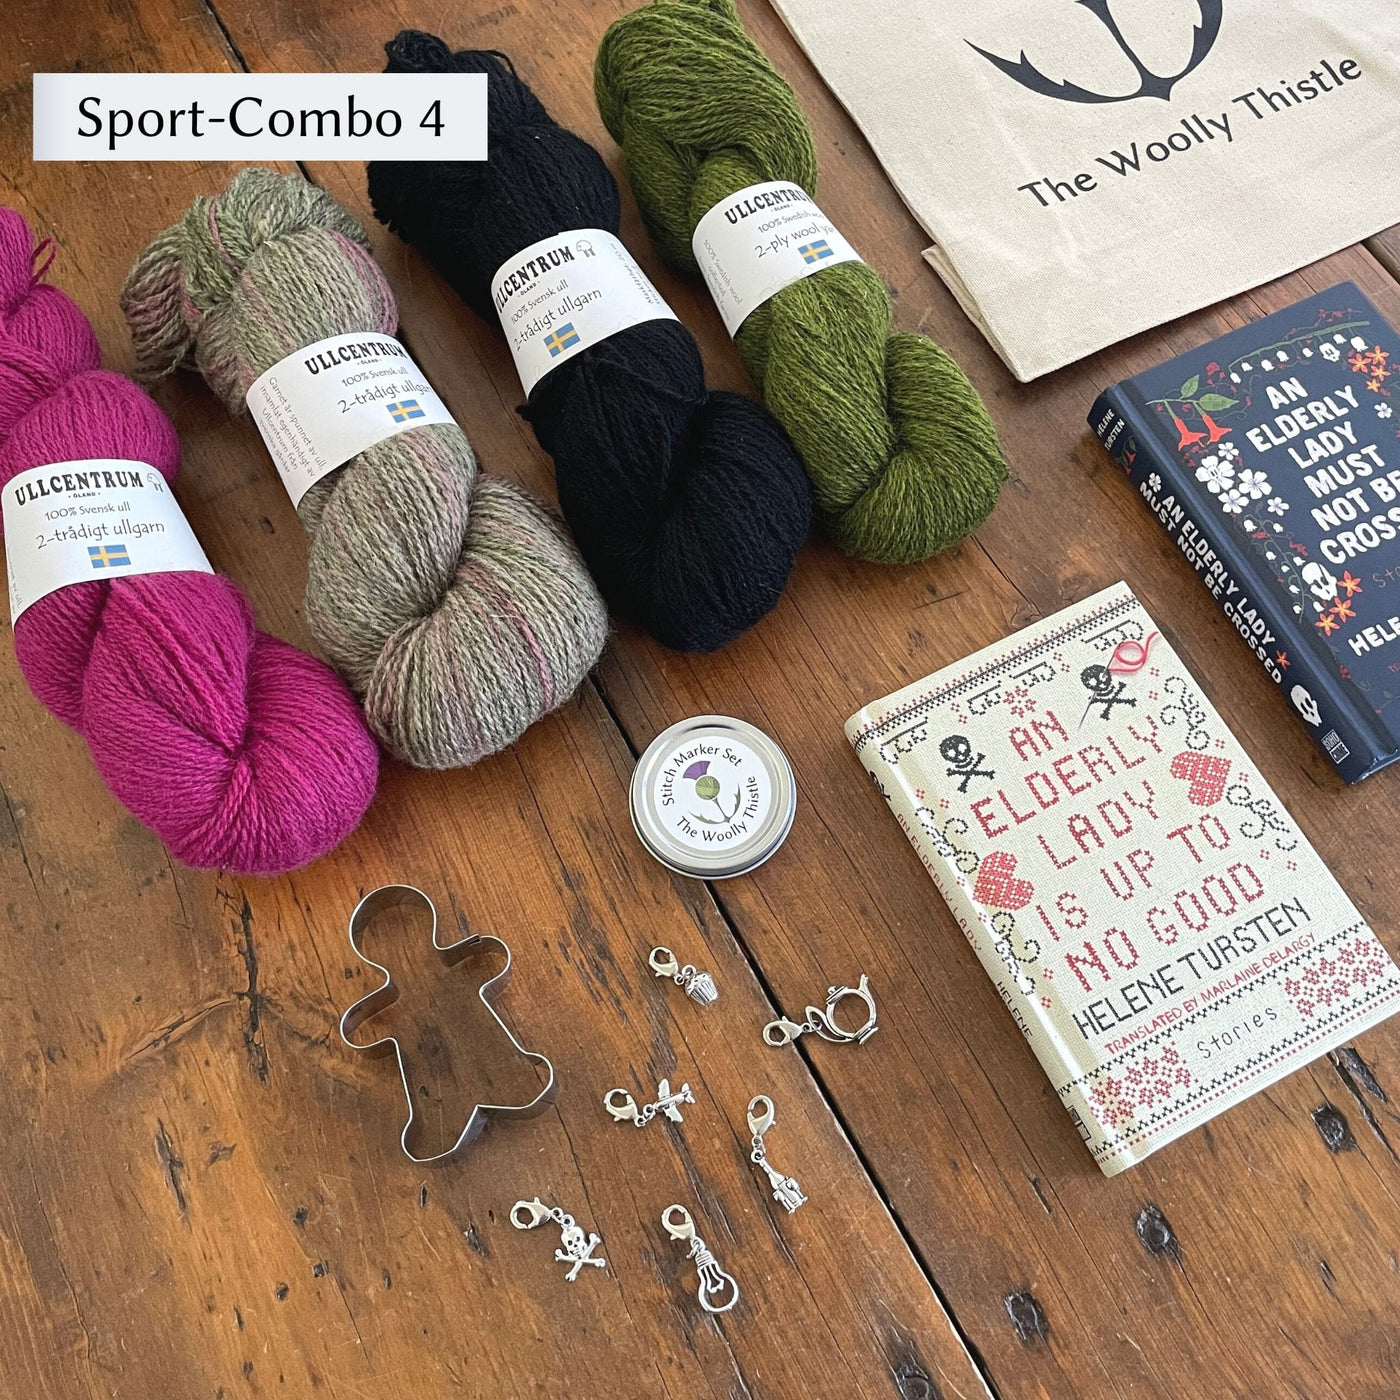 The Swedish Book Bundle components which include two books by Helene Tursten, TWT Tote bag, Stitch marker set, gingerbread cookie cutter, and Ullcentrum Sport Weight yarn. Components are shown and laid out on table. Yarn colors in Sport Combo 4 include a bright pink,  grey, black, and green.